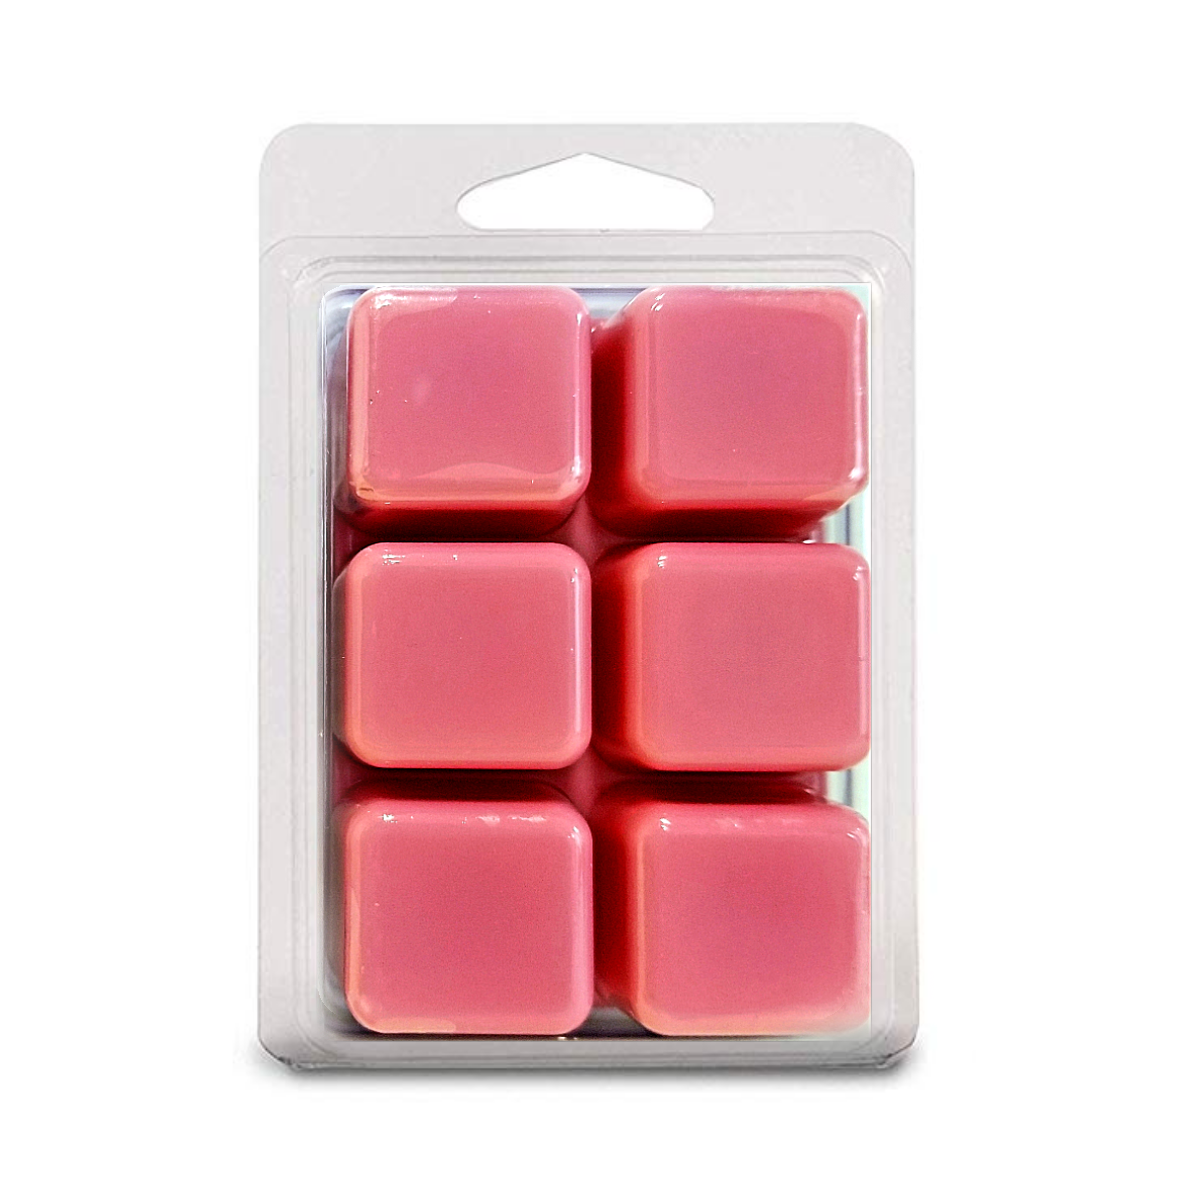 Candy Cane - 3.2 oz Clamshell